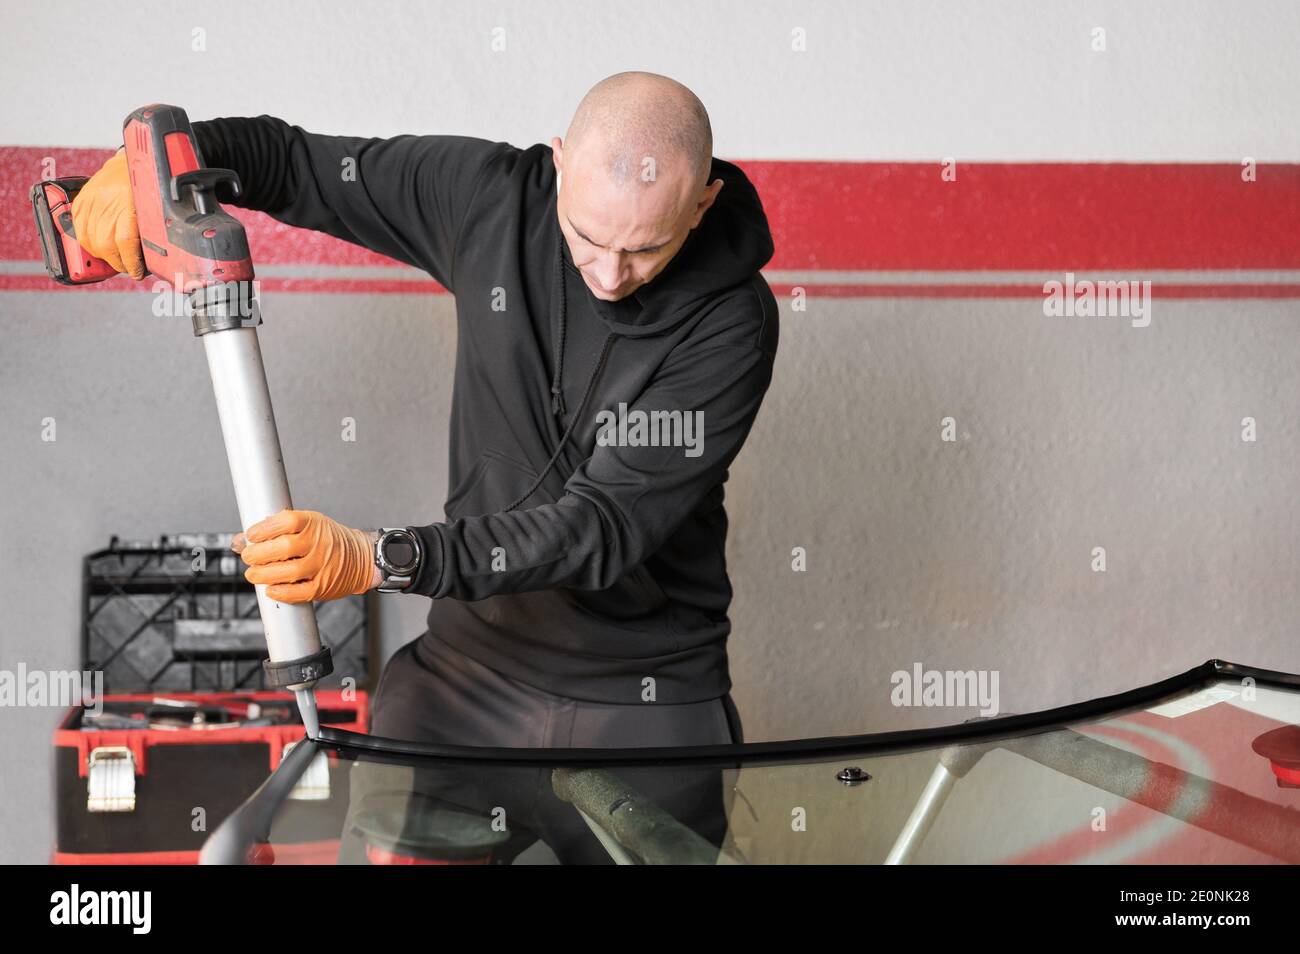 Glazier applying rubber sealing to windshield in garage, close up. High quality photo. Stock Photo